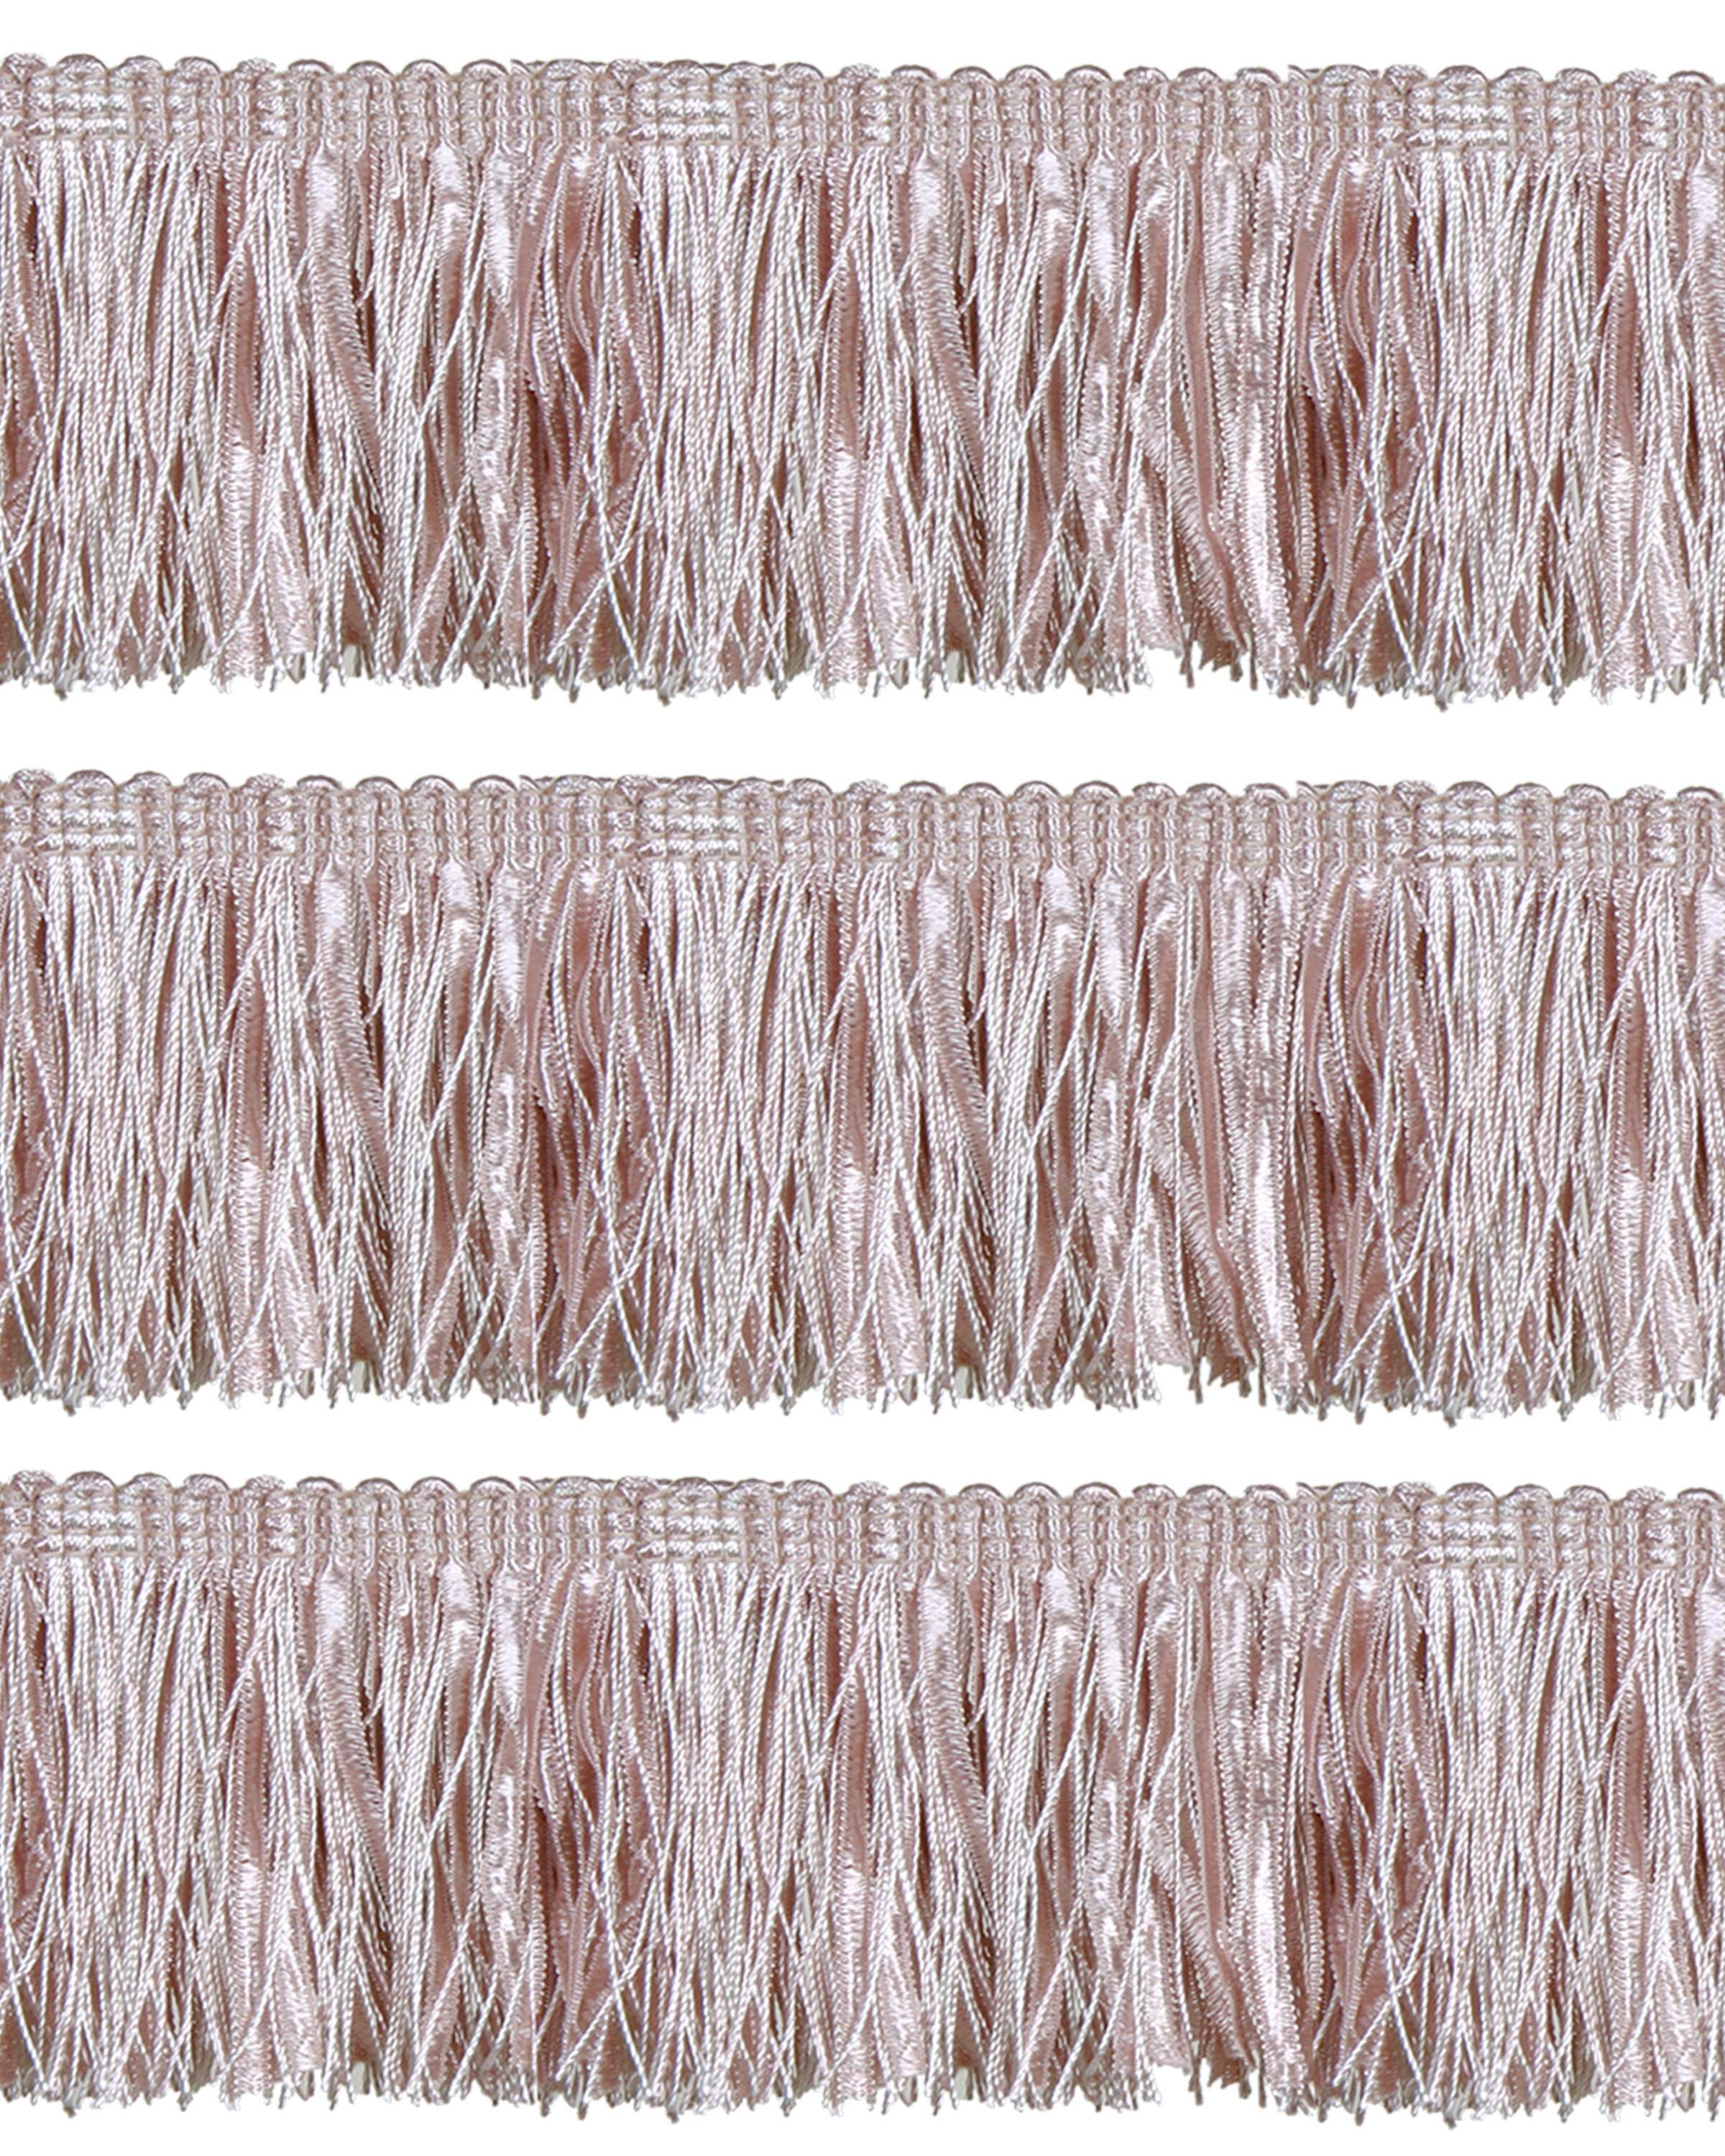 Bullion Fringe with Ribbons - Pale Pink 60mm Price is for 5 metres